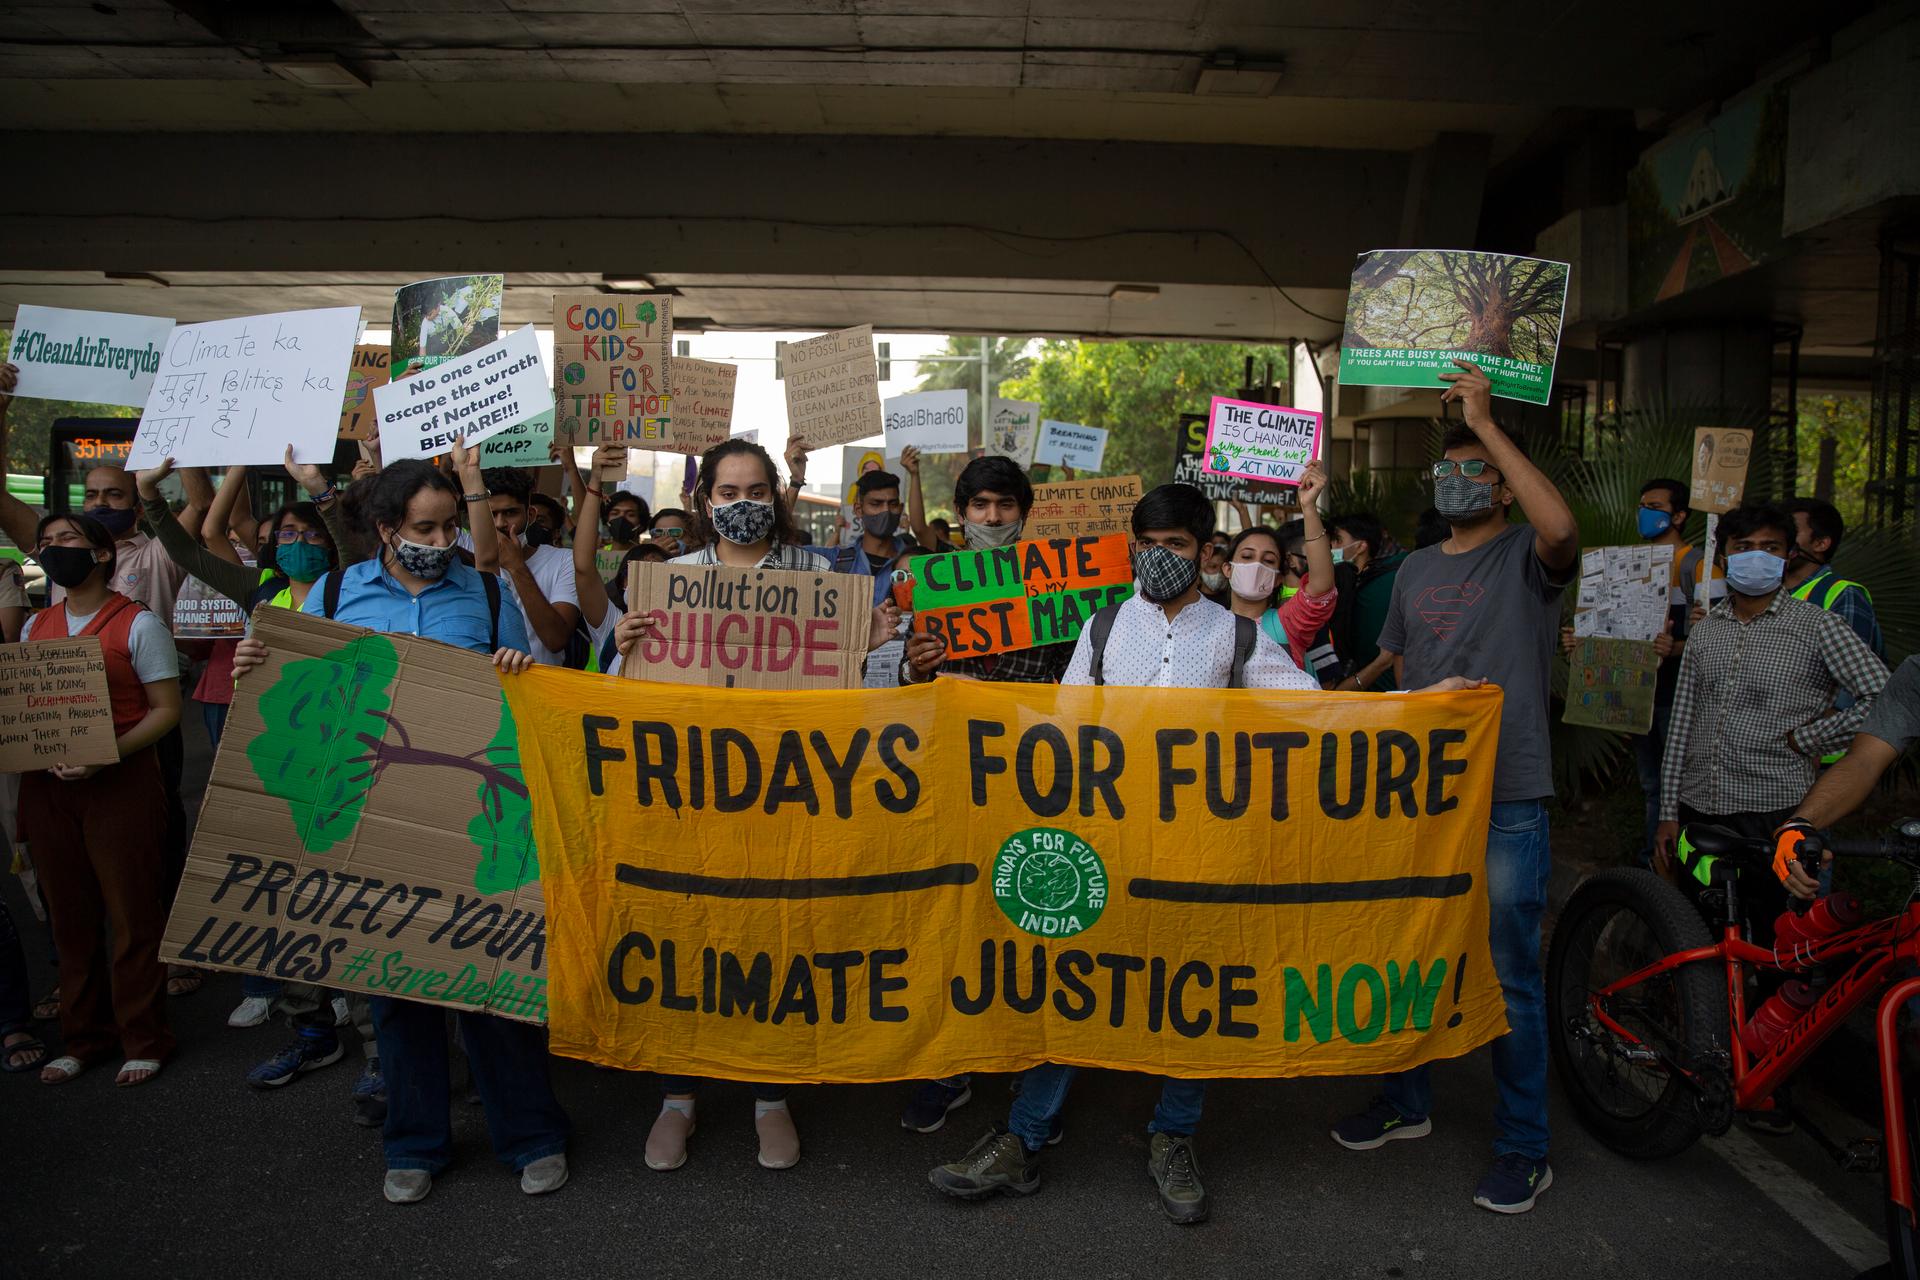 Student activists carry posters and shout slogans as they participate in a protest march against climate change in Delhi, India, March 19, 2021.